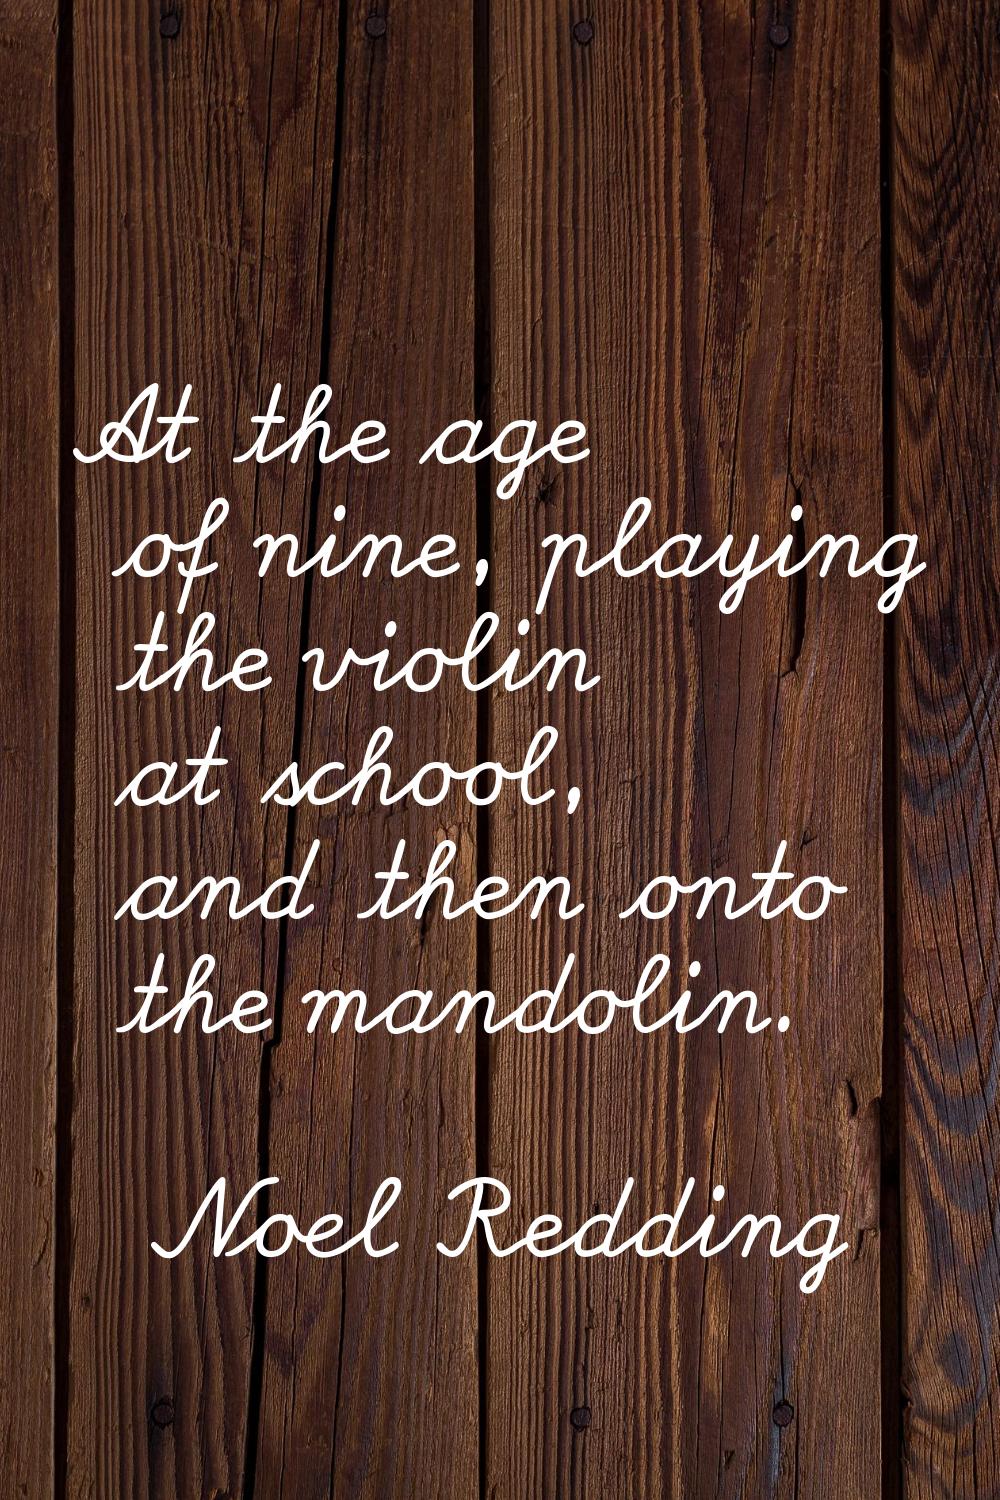 At the age of nine, playing the violin at school, and then onto the mandolin.